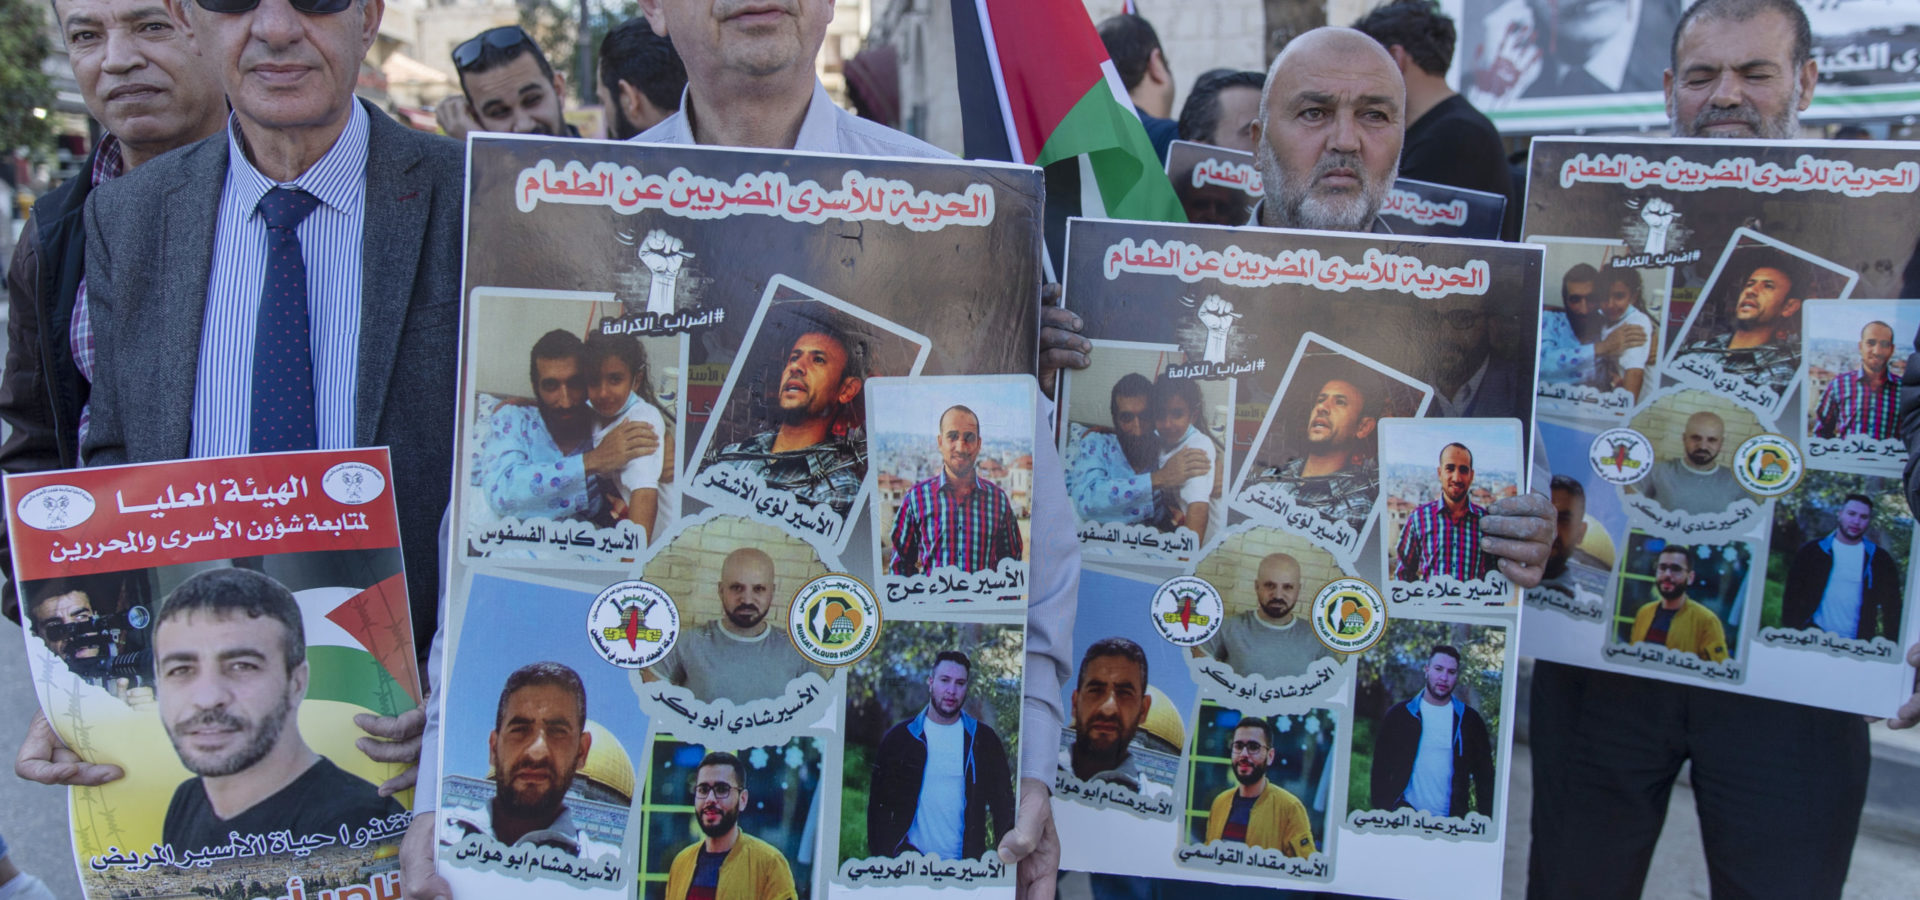 Palestinian Hunger Strikes Resist New Israeli Regime’s Continuation of Old Regime’s Brutality